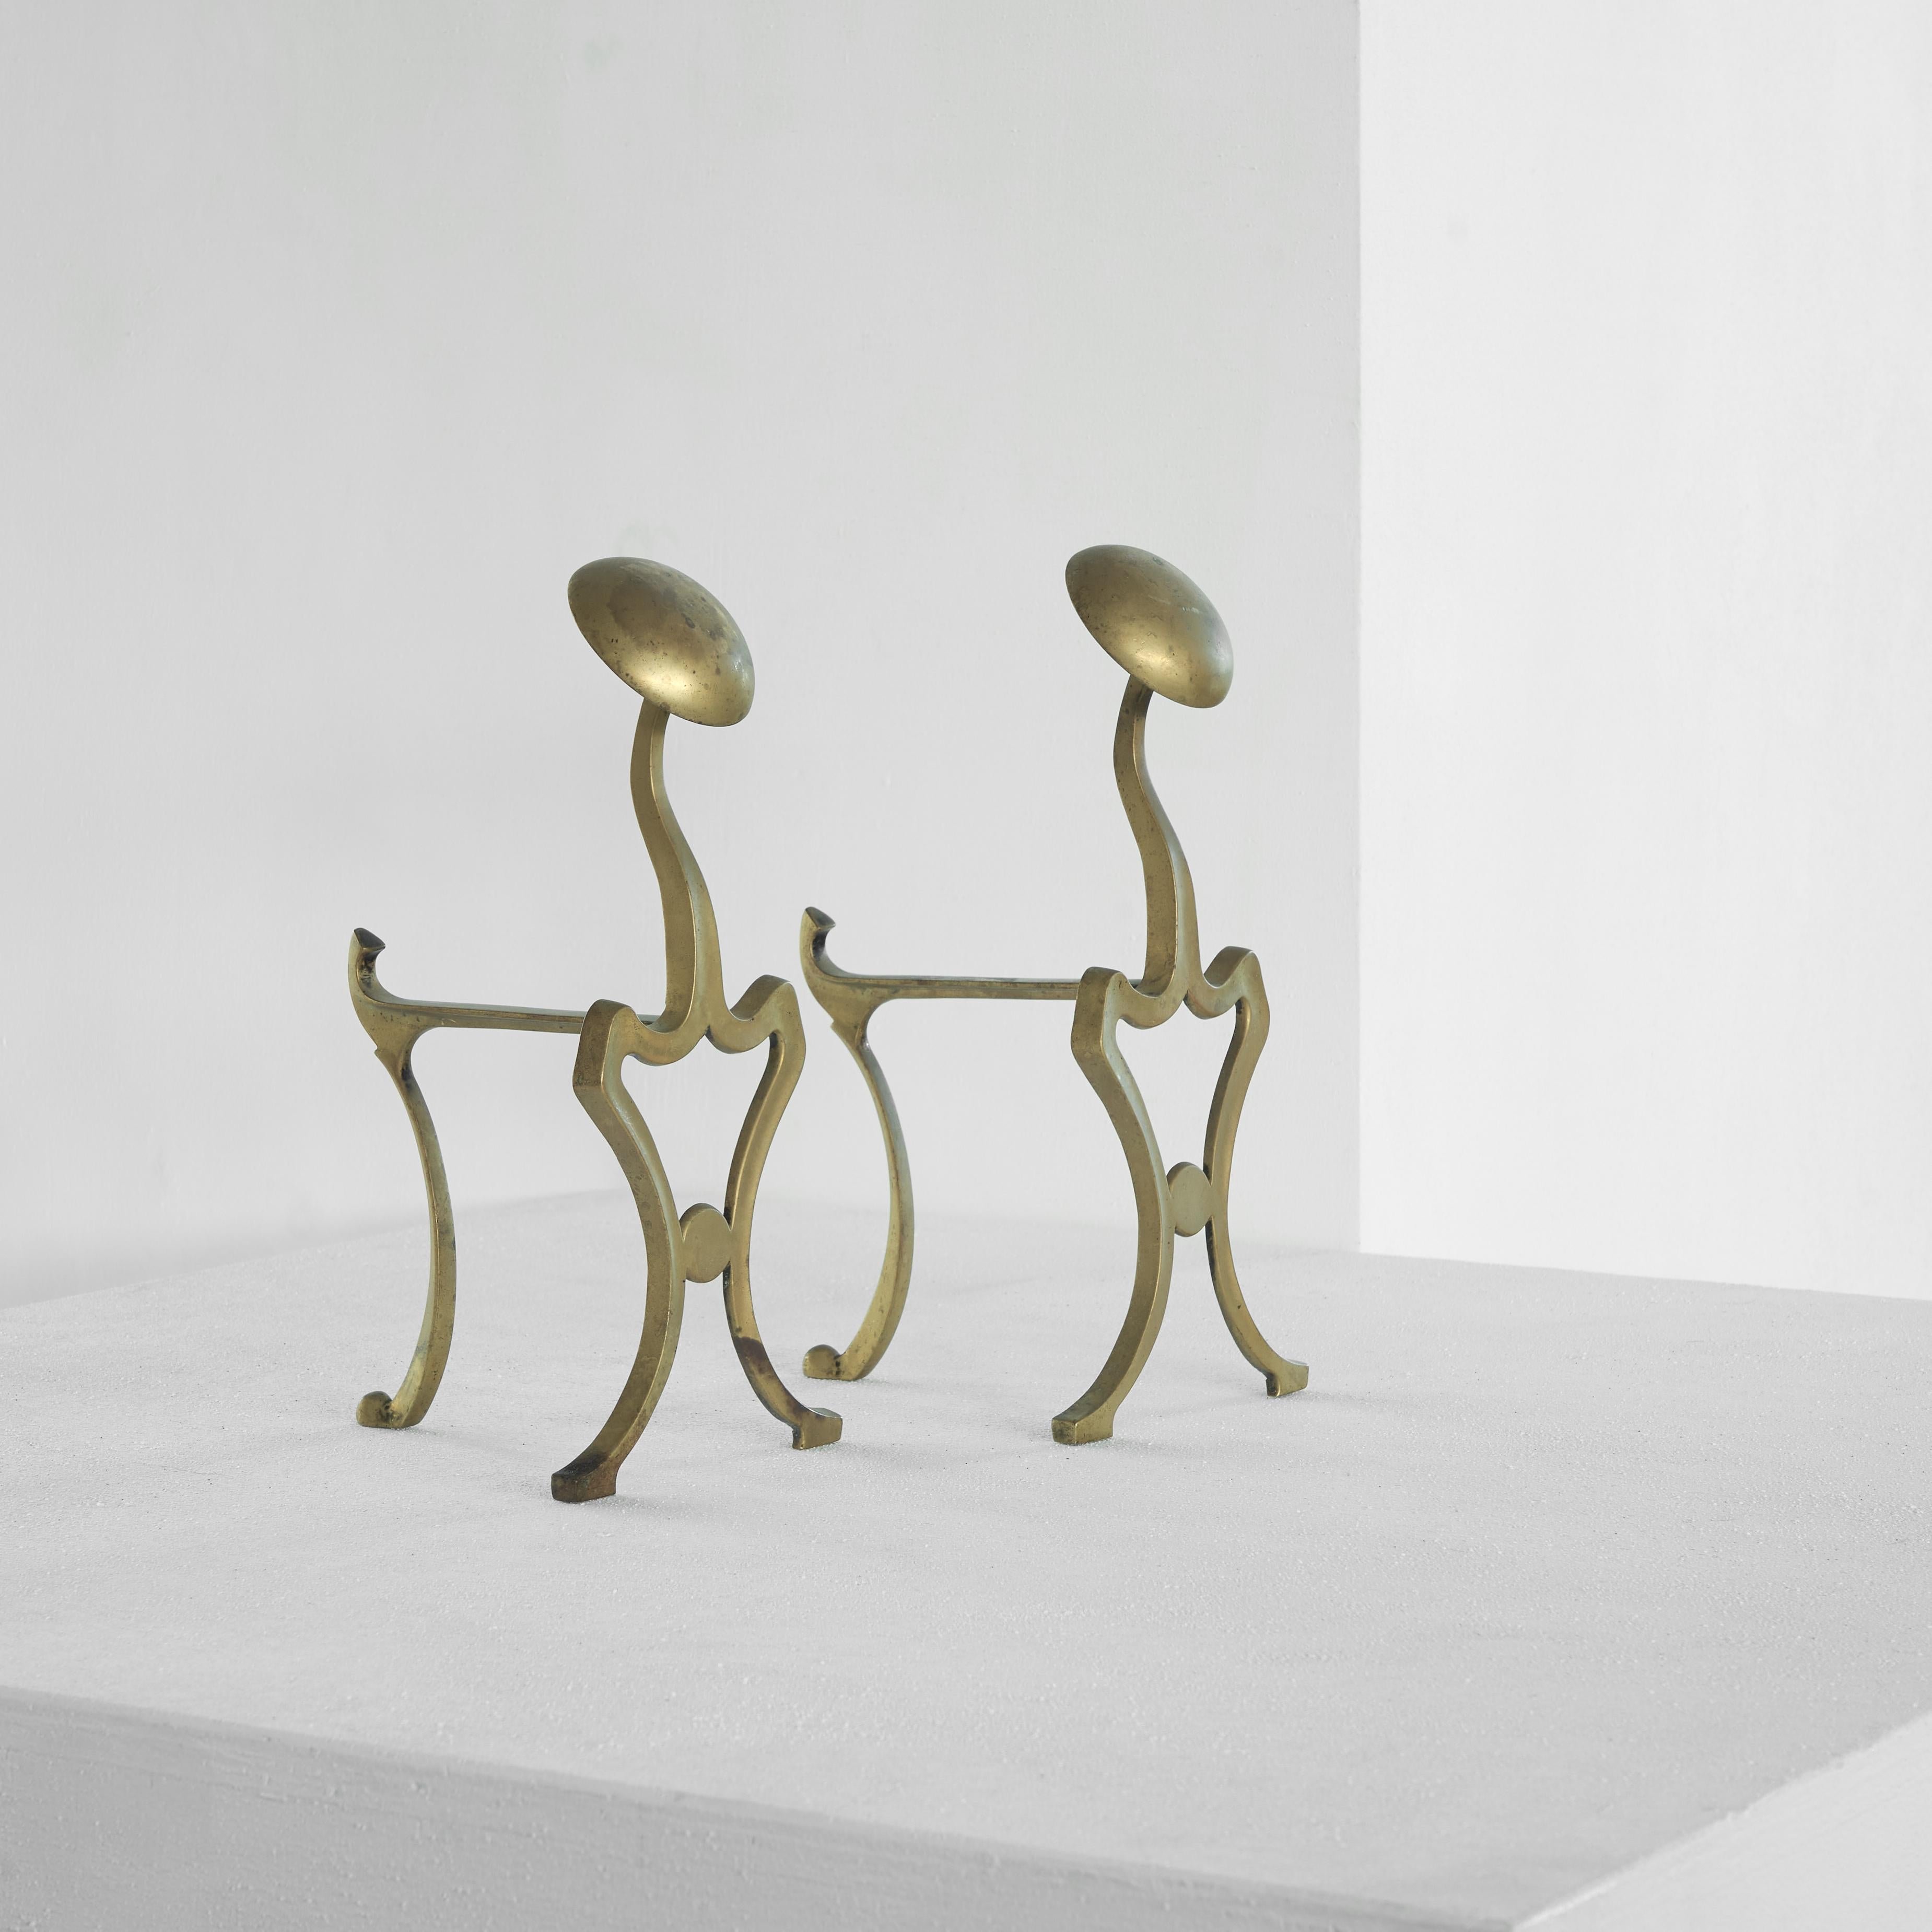 20th Century Pair of Art Nouveau Andirons in Patinated Brass For Sale